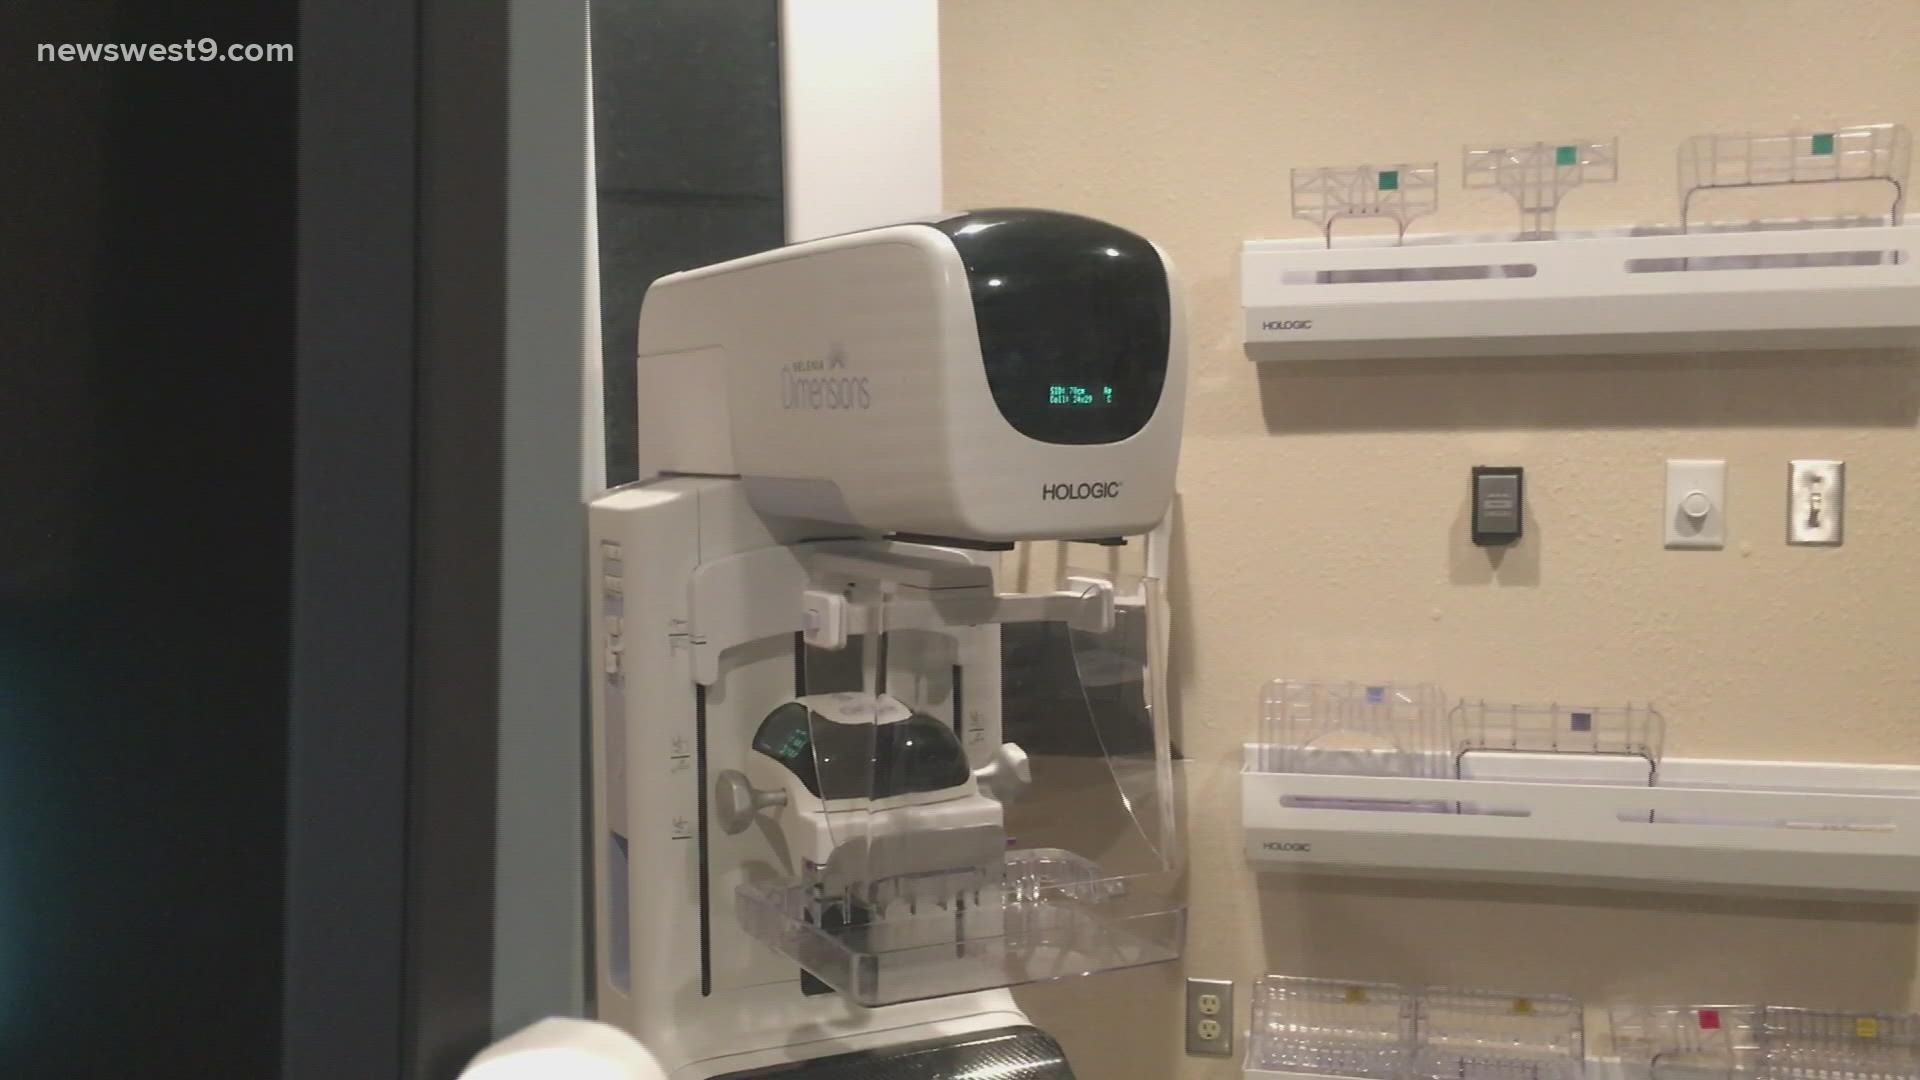 Doctors say mammograms can be done quickly with the help of imaging machine advancements.